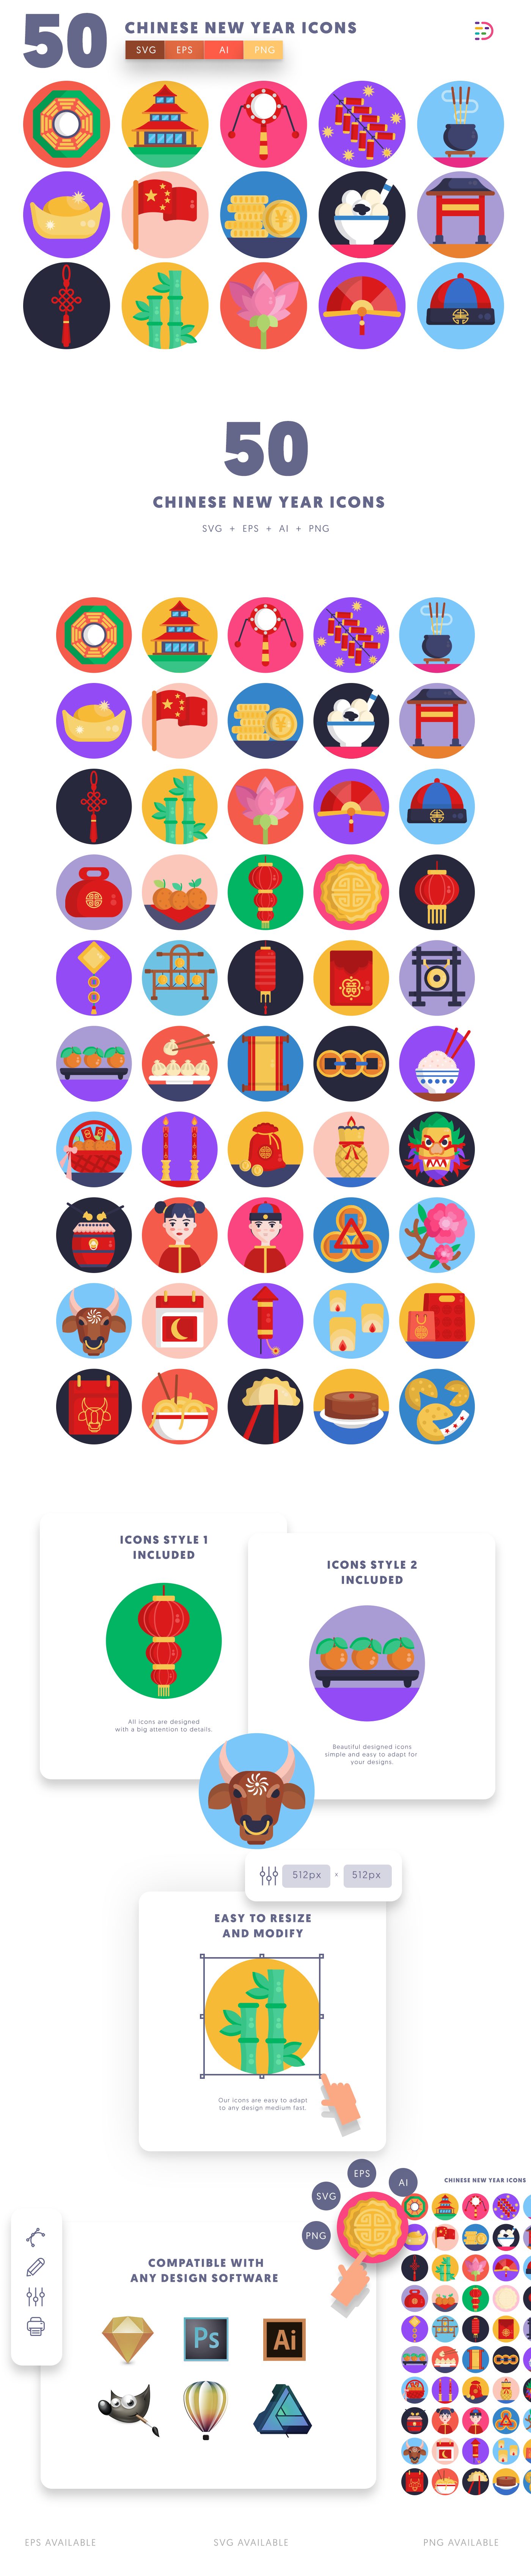 Editable chinese new year icons icon pack, easy to edit and customize icons